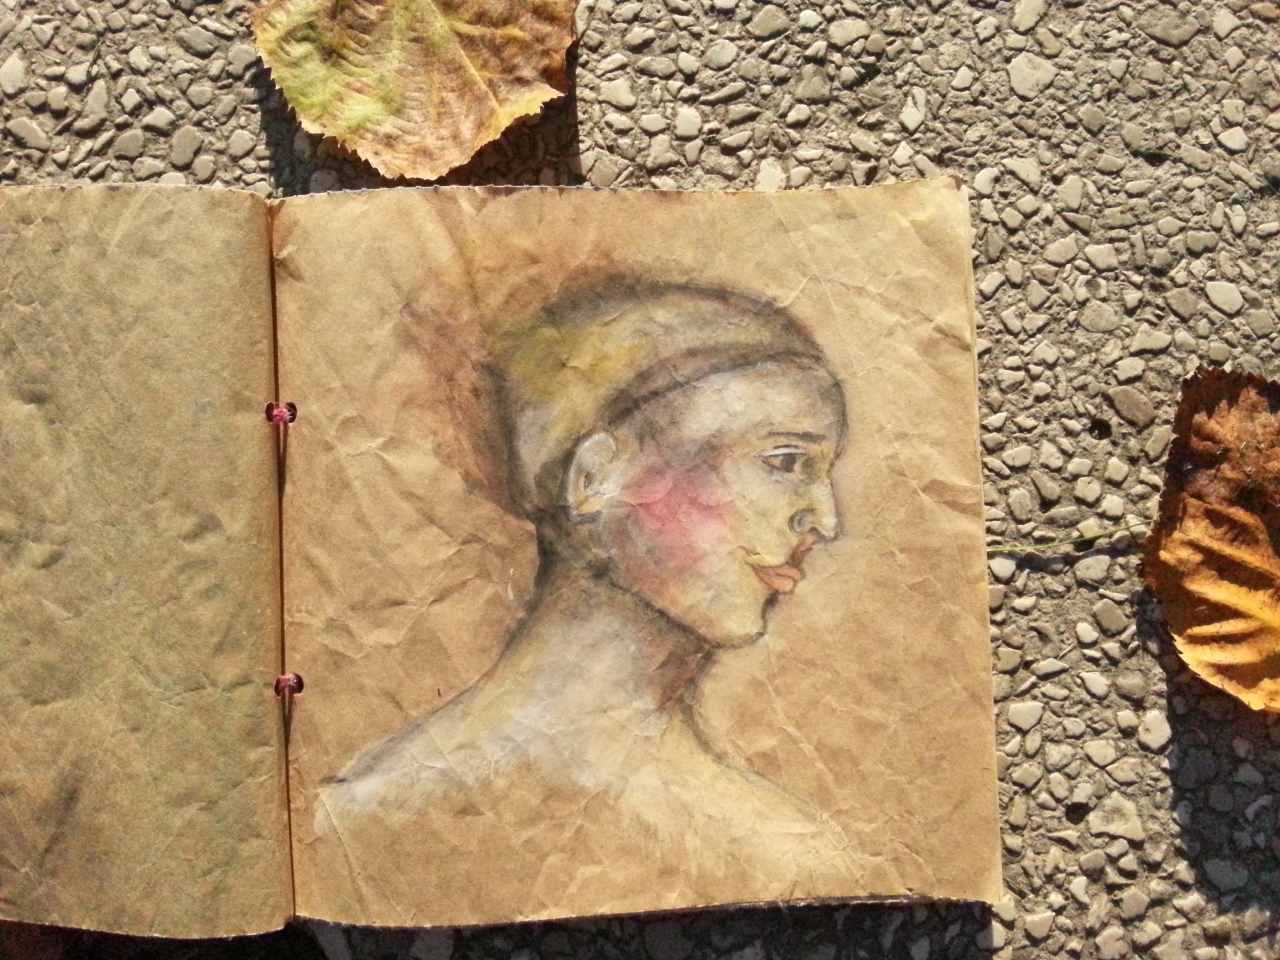 Whimsical portraiture on bag paper - autumn inspiration by Cristina Parus @ creativemag.ro